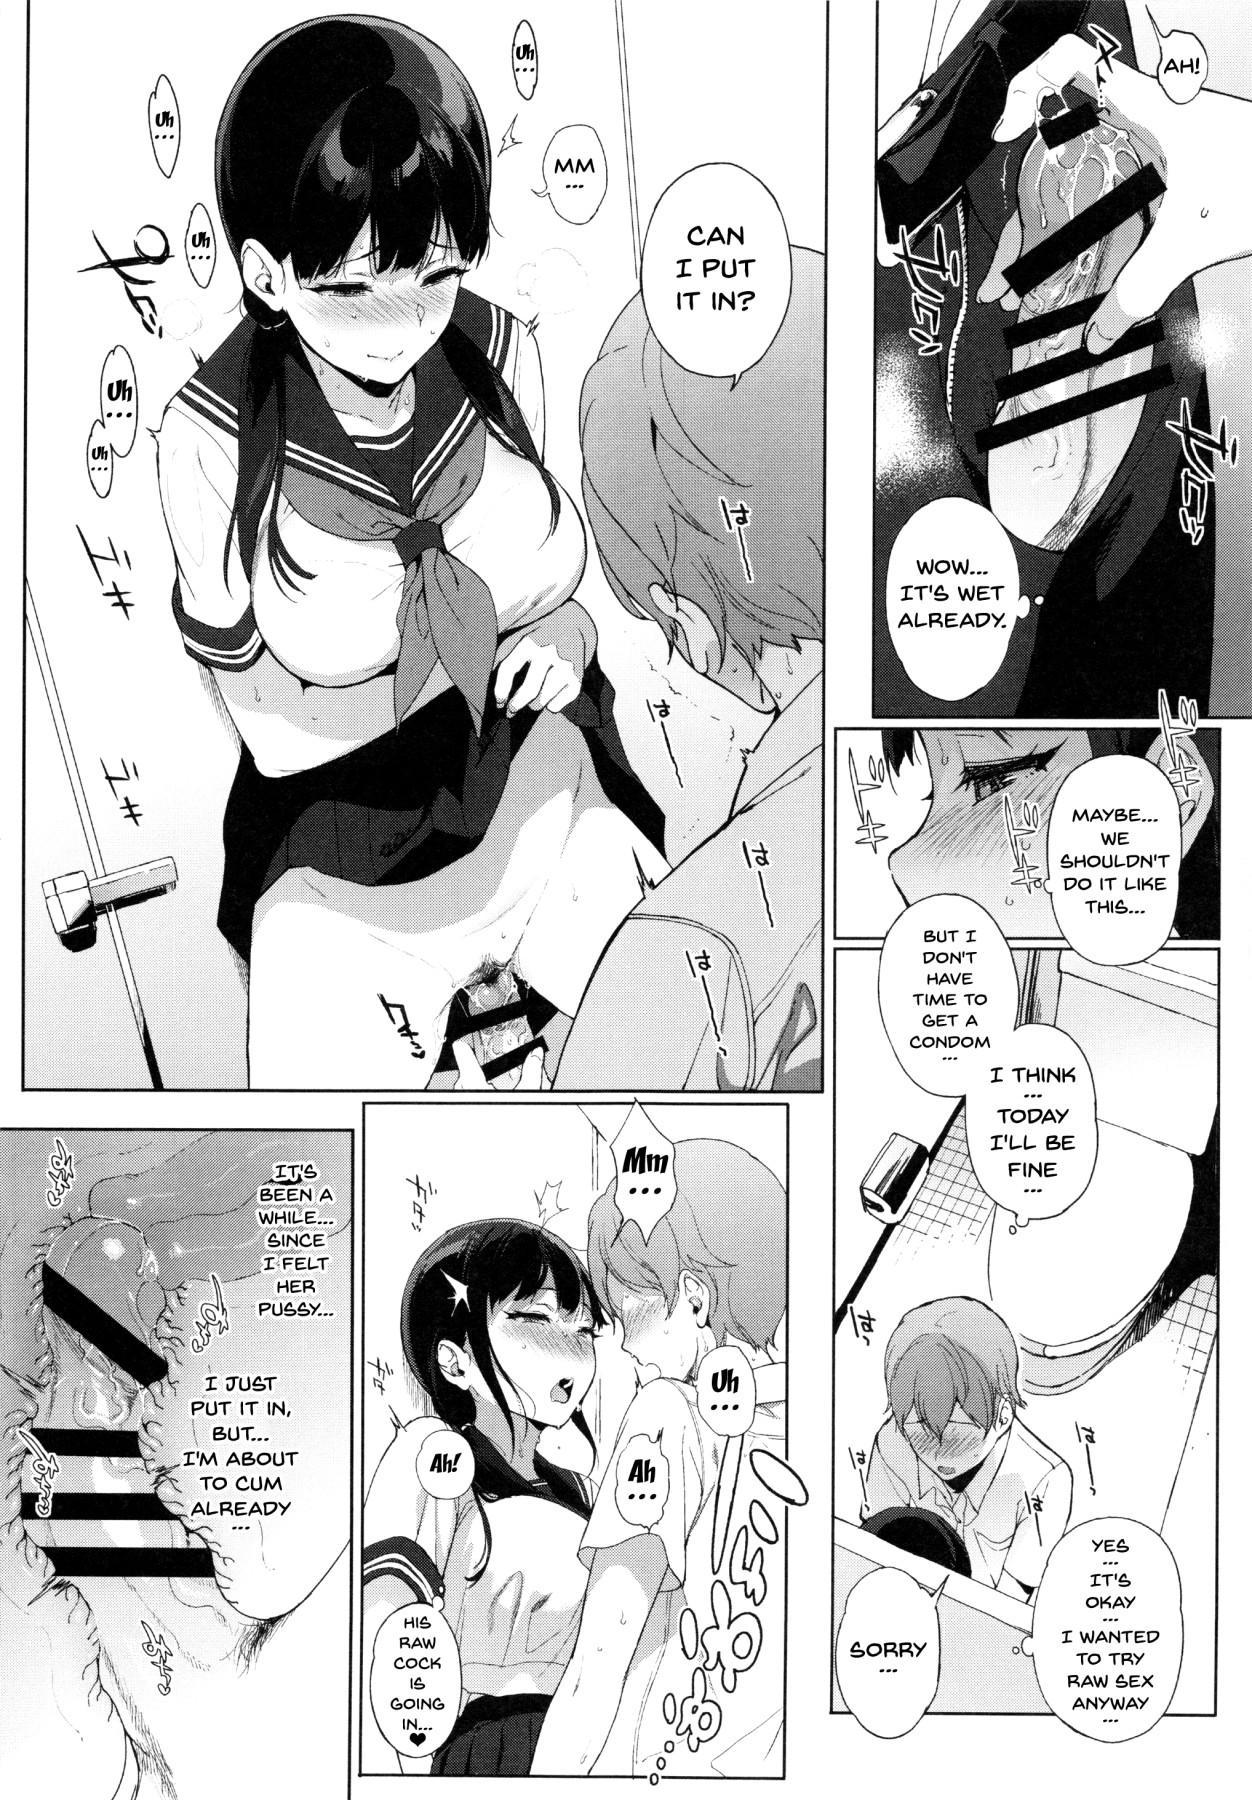 Hardcore Succubus Stayed Life 6 Chastity - Page 6